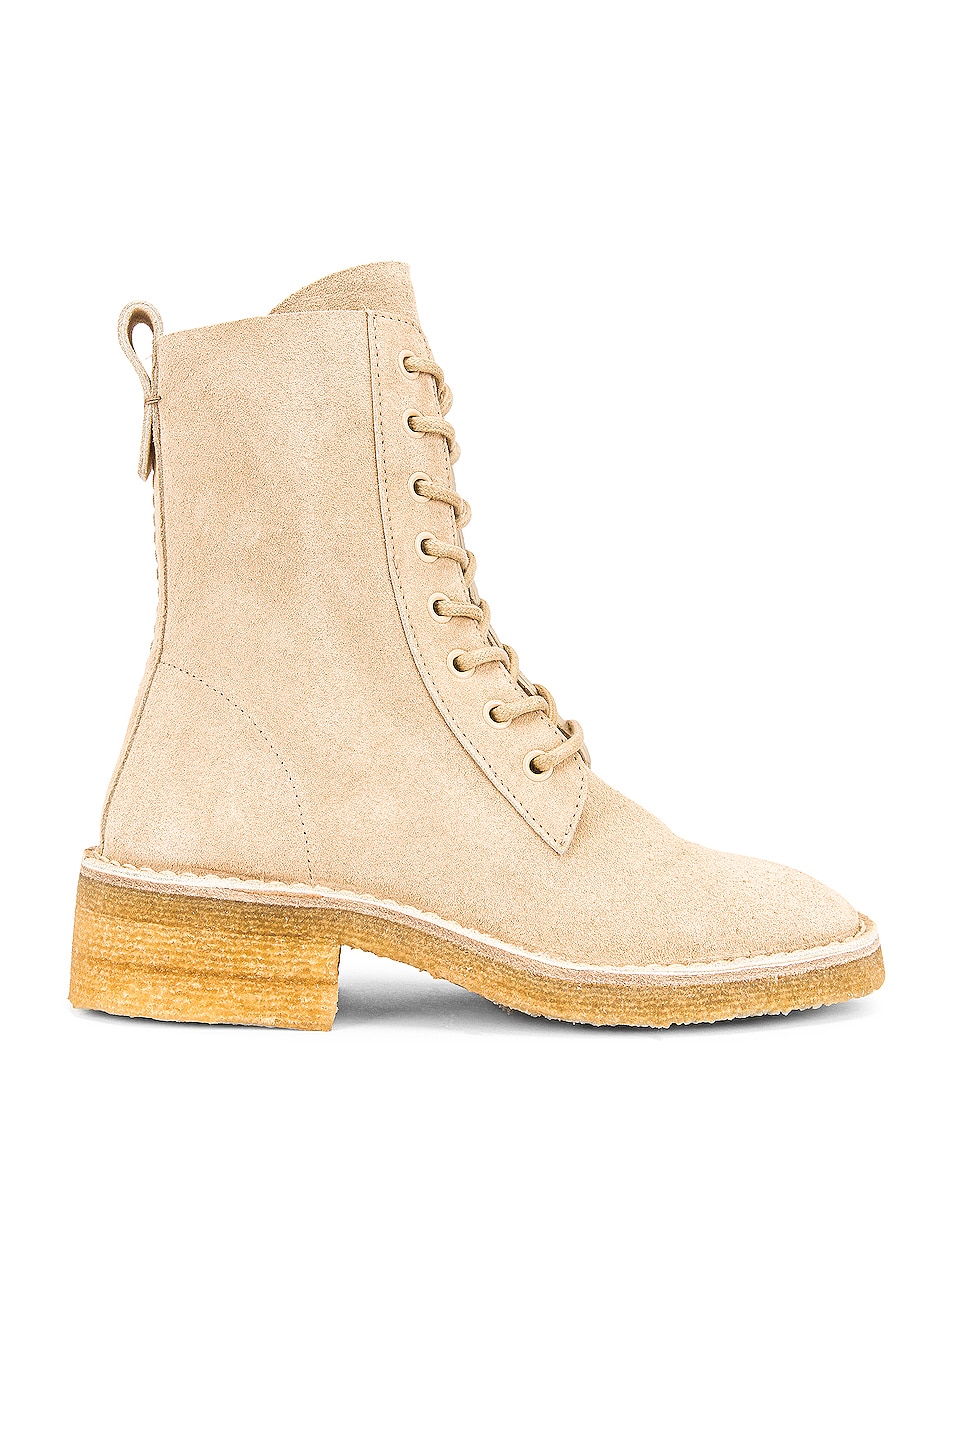 Image 1 of Chloe Edith Ankle Boots in Angora Beige